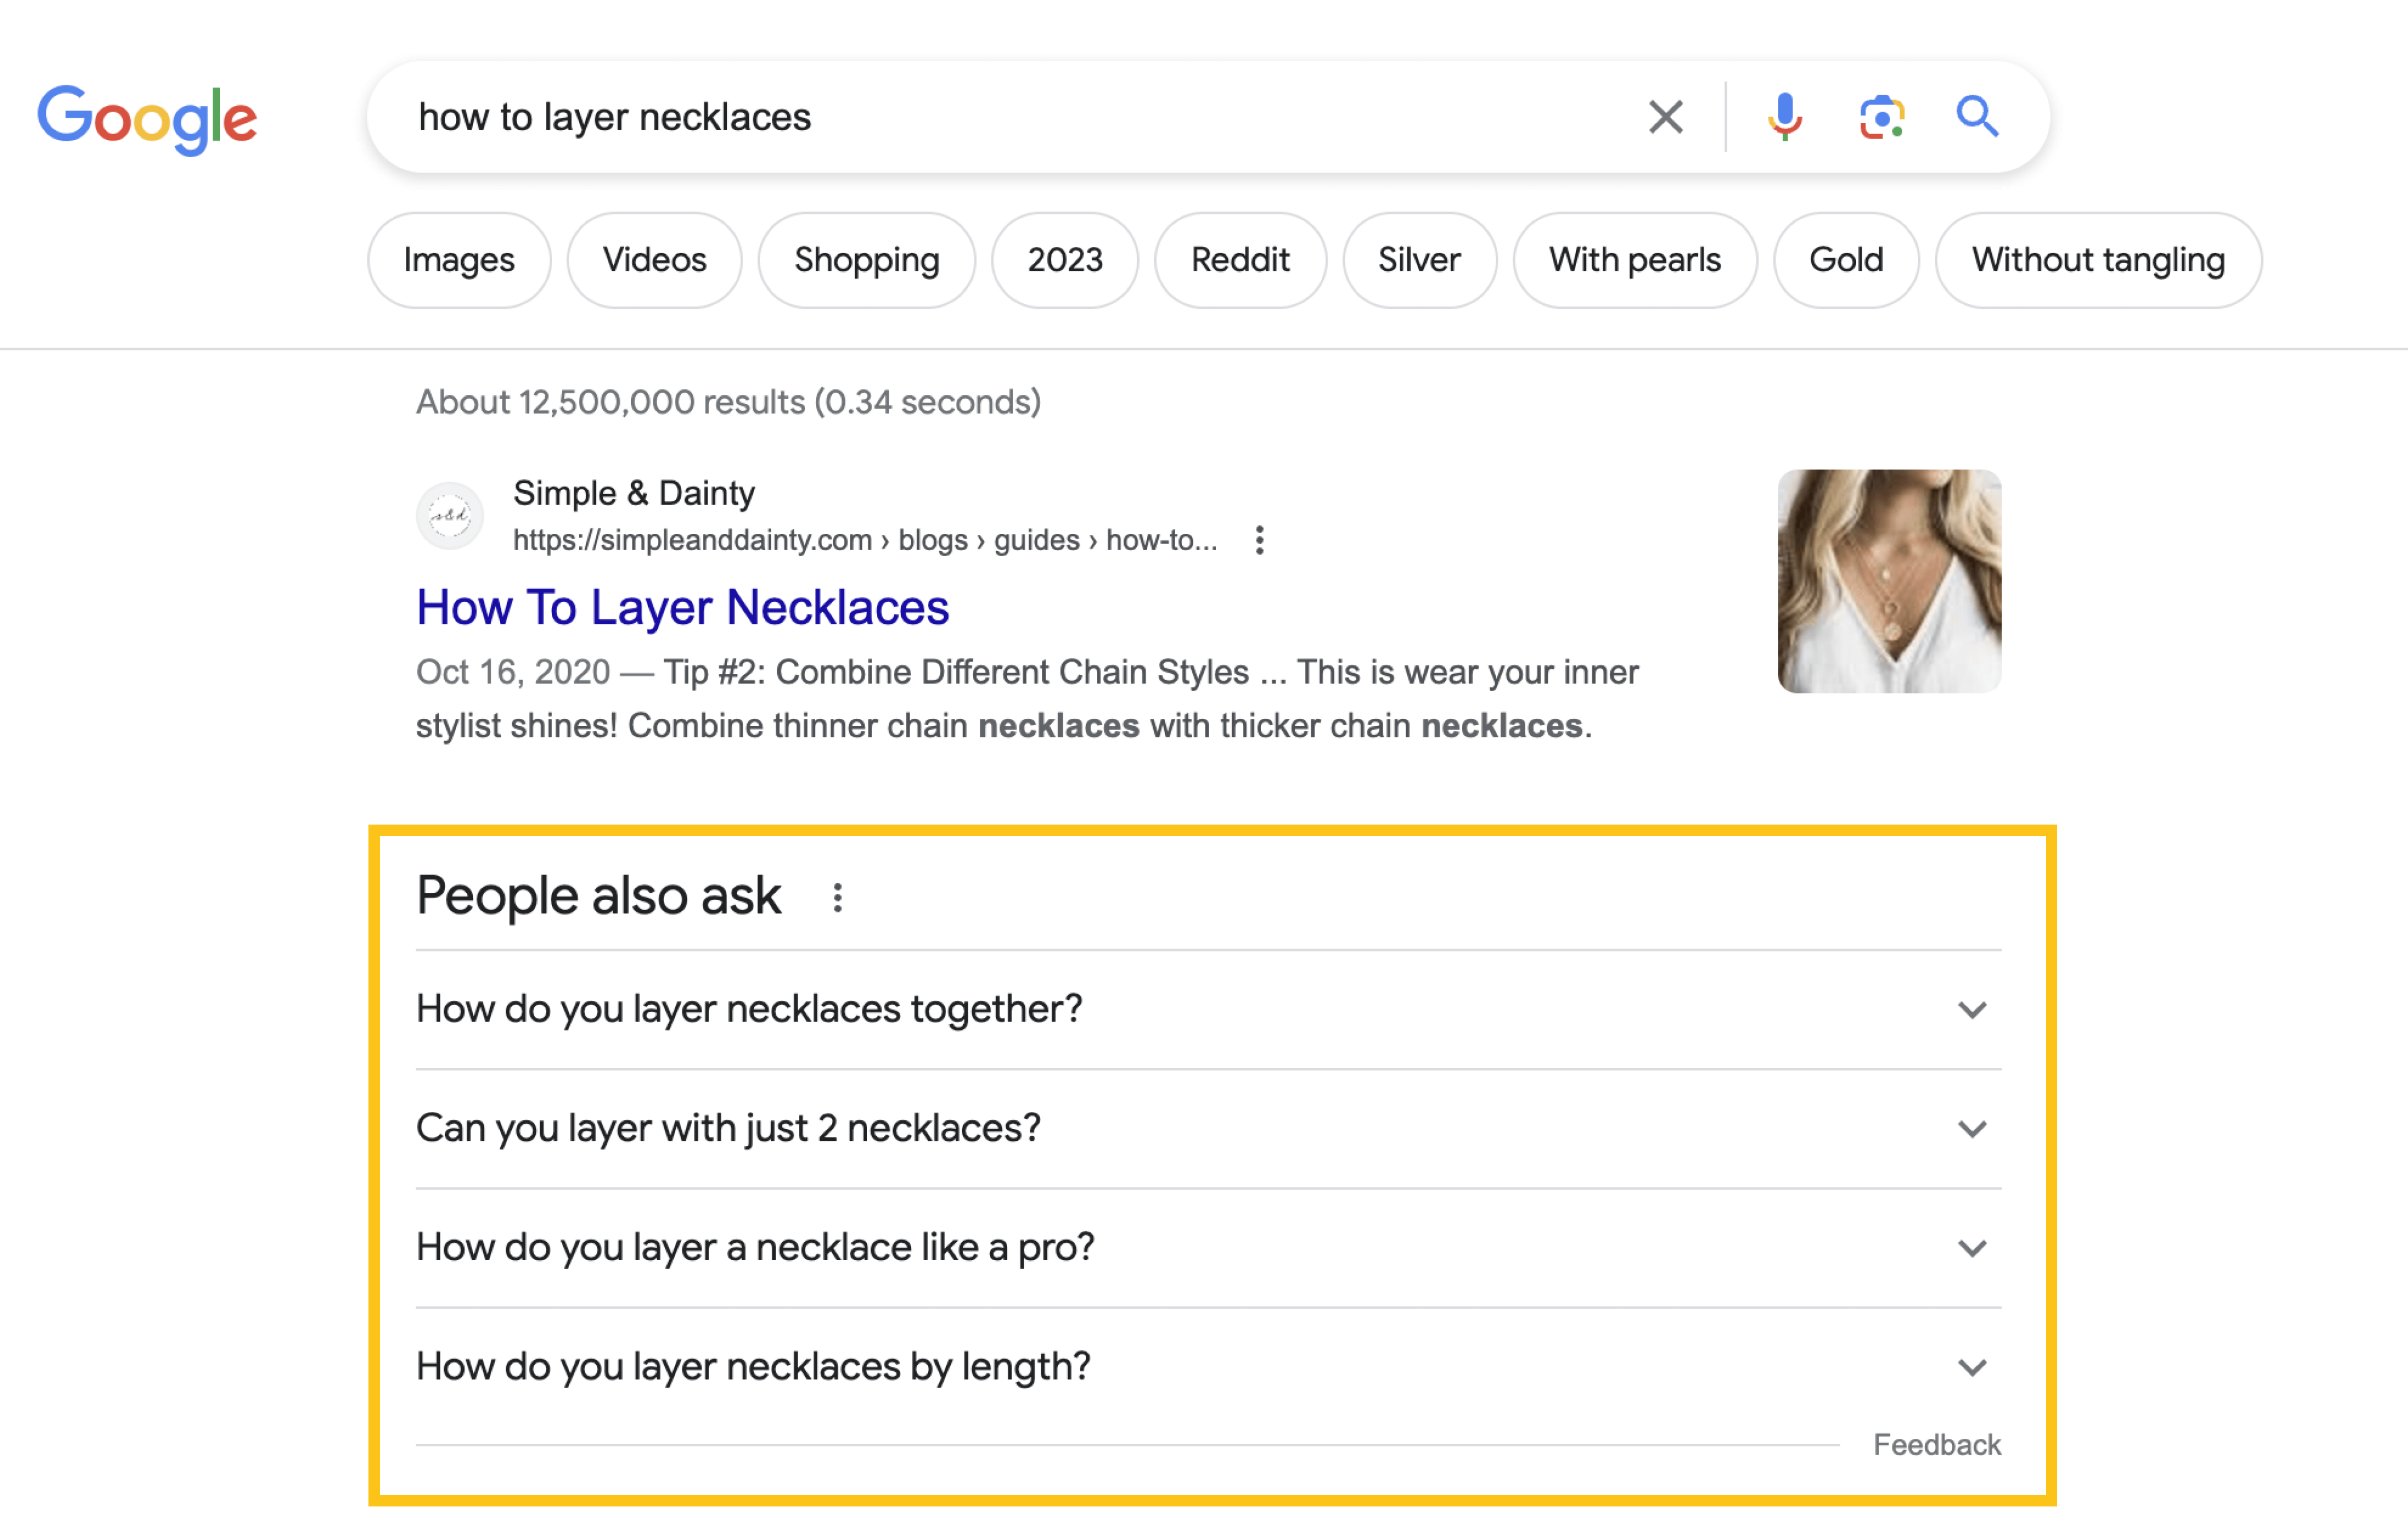 A screenshot of a Google results page for the search query: how to layer necklaces. The People also ask section is highlighted in a yellow box. The queries shown in that section are: how do you layer necklaces together, can you layer with just 2 necklaces, how do you layer a necklace like a pro, and how do you layer necklaces by length?